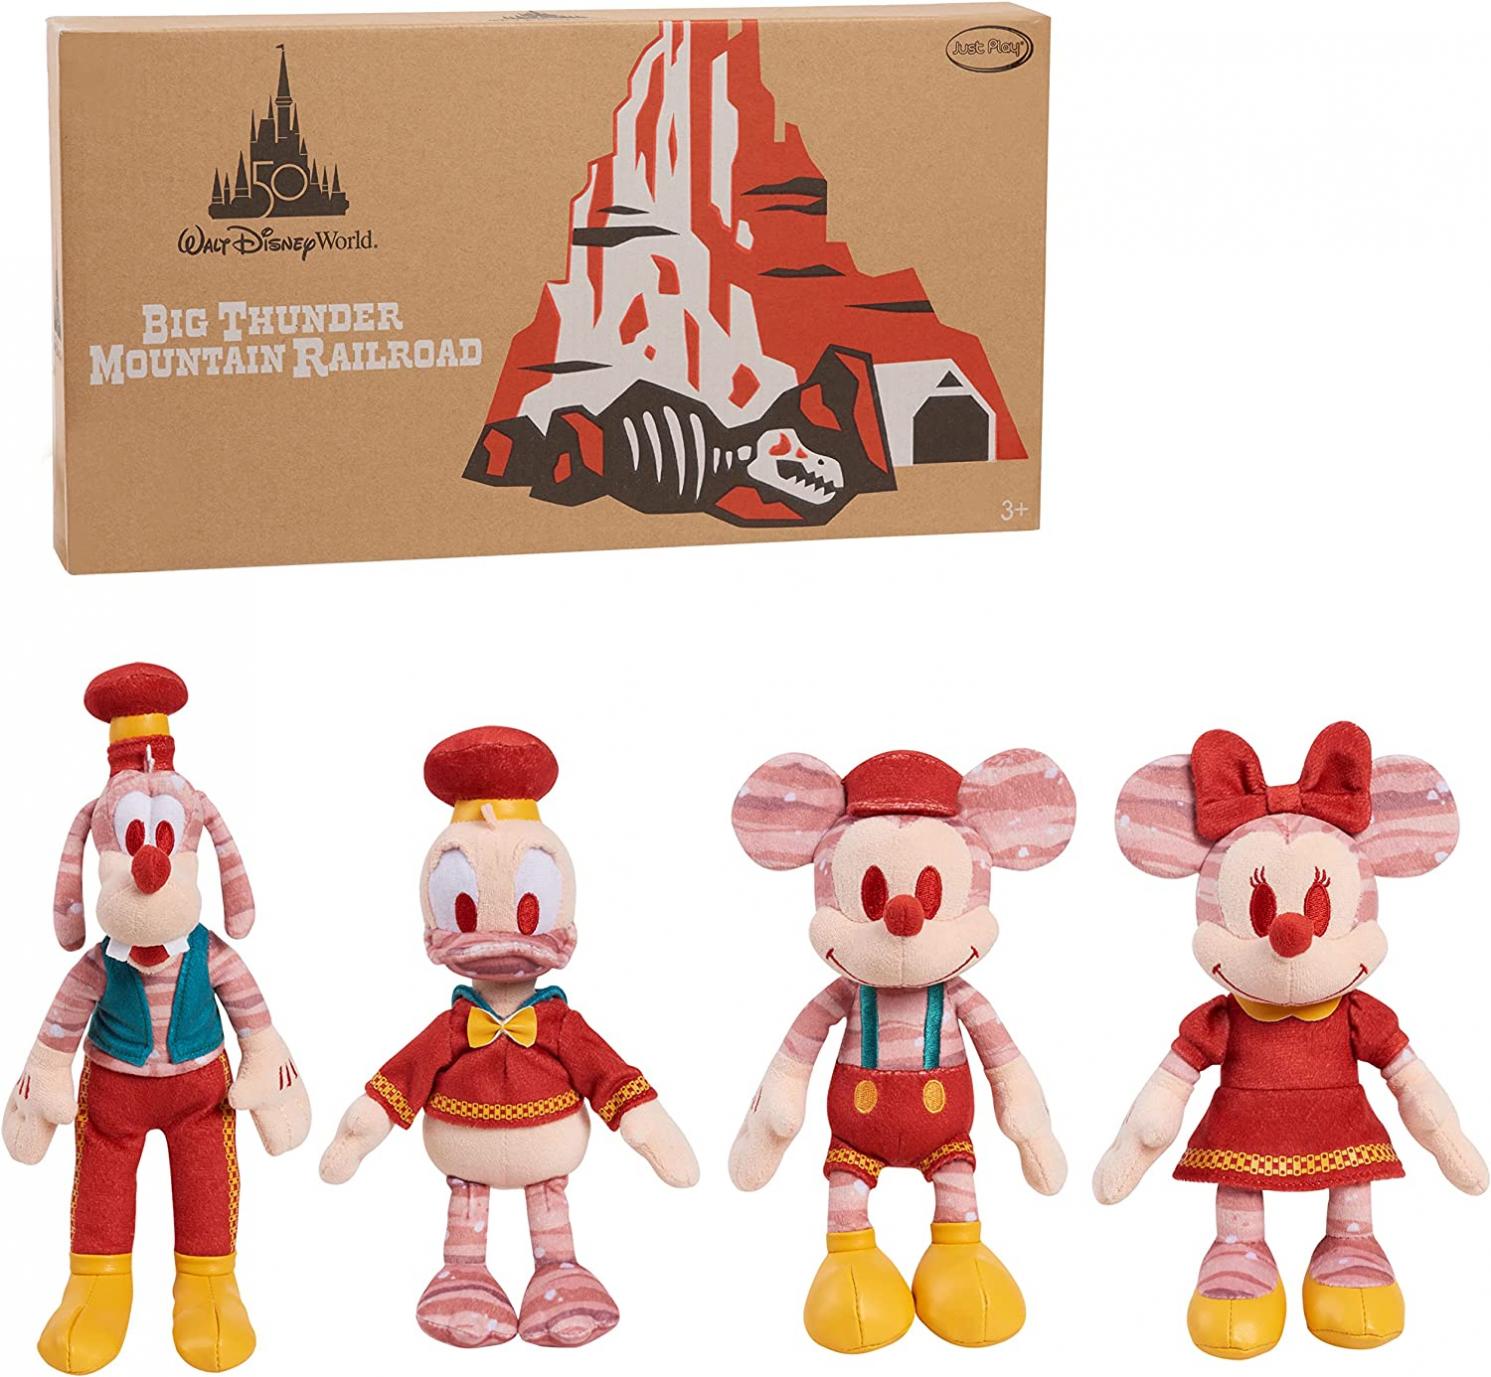 Walt Disney World 50th Anniversary Celebration Big Thunder Mountain Railroad Limited Edition 9-Inch Commemorative Plush Stuffed Animals, Kids Toys for Ages 3 Up, Gifts and Presents, Amazon Exclusive